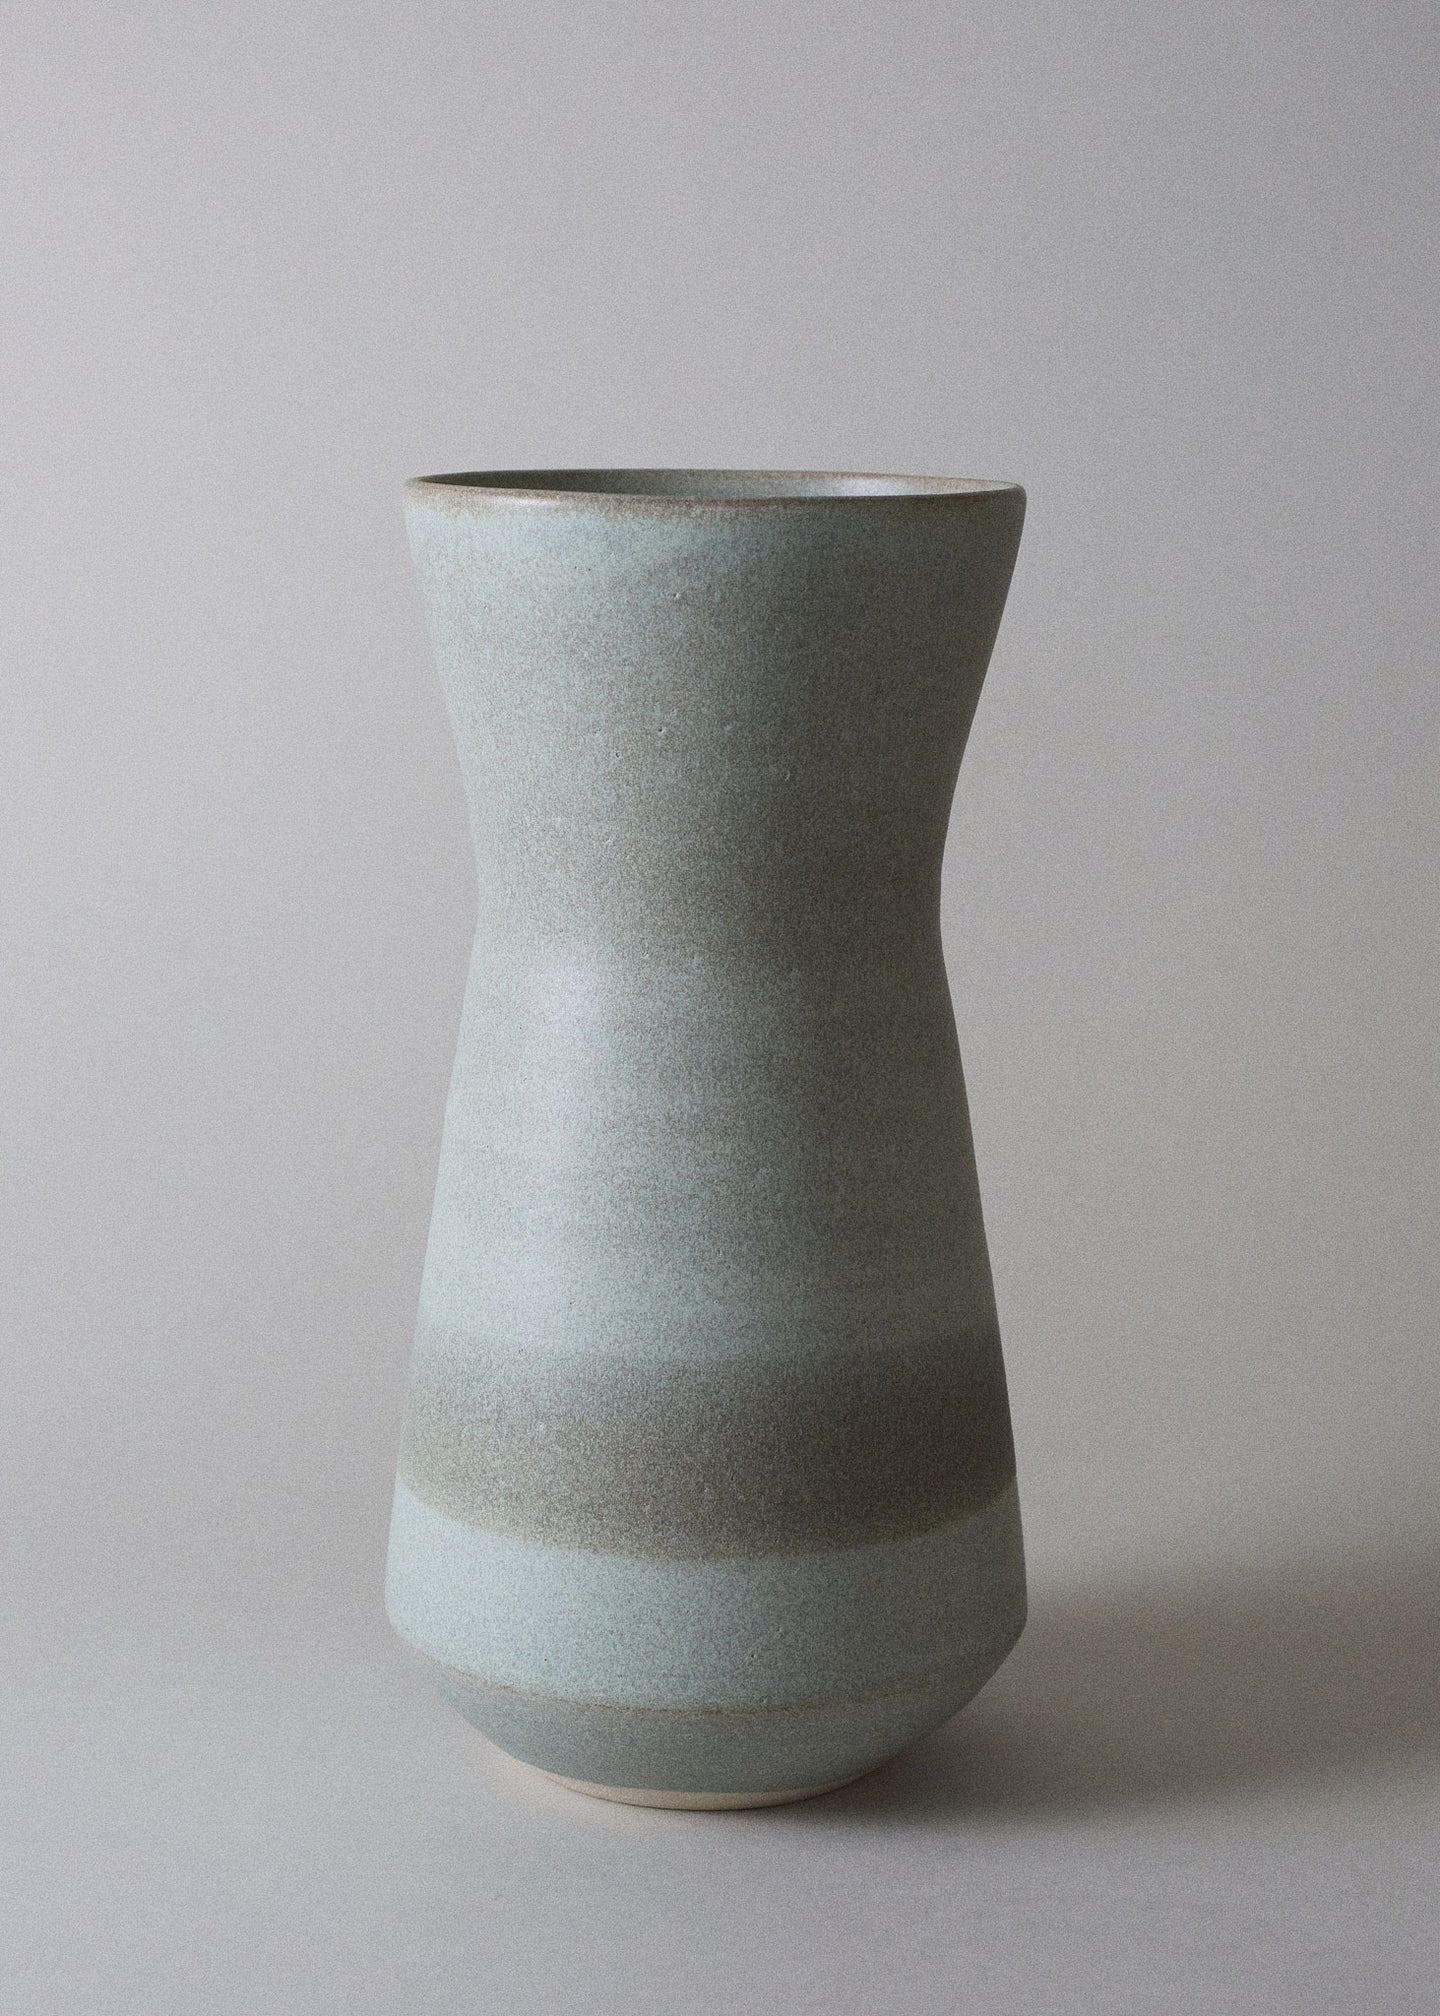 Extra Large Architectural Series Vase in Mineral - Victoria Morris Pottery